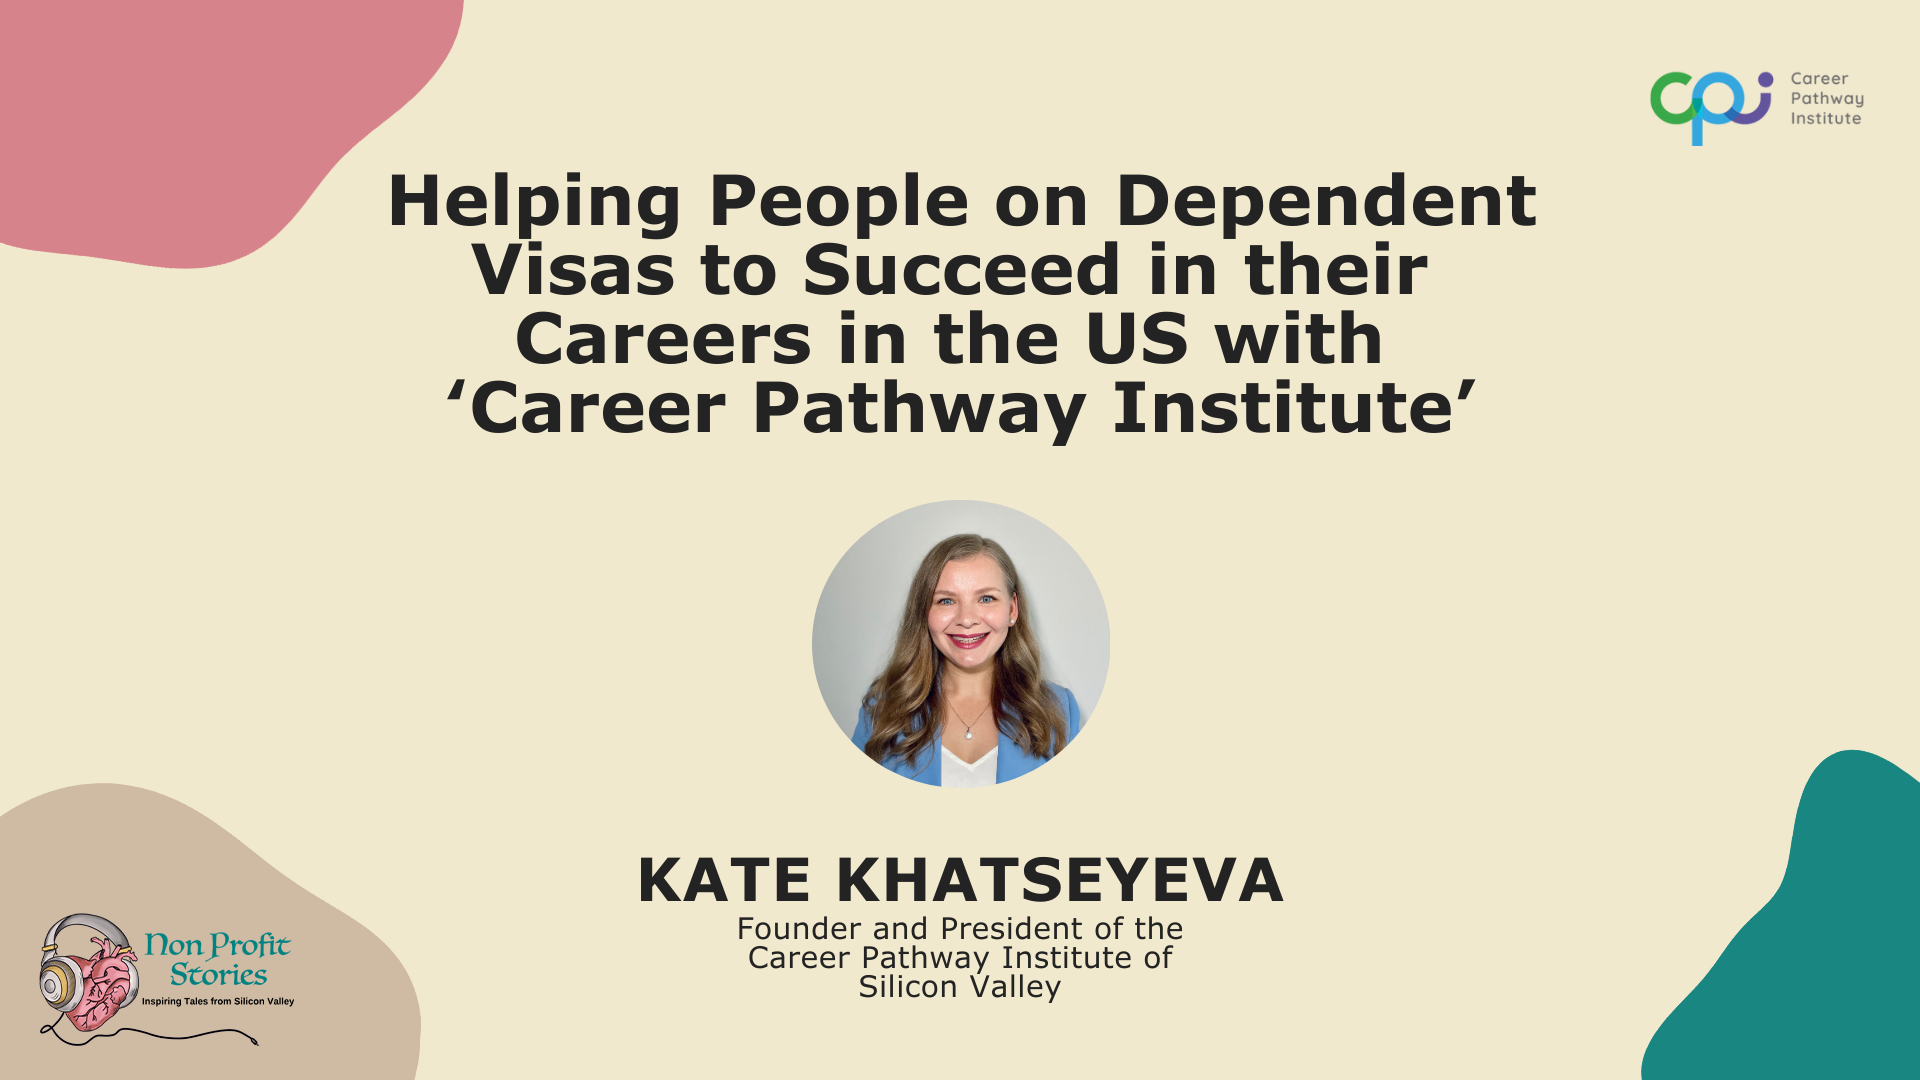 Helping People on Dependent Visas to Succeed in their Careers in the US with ‘Career Pathway Institute’